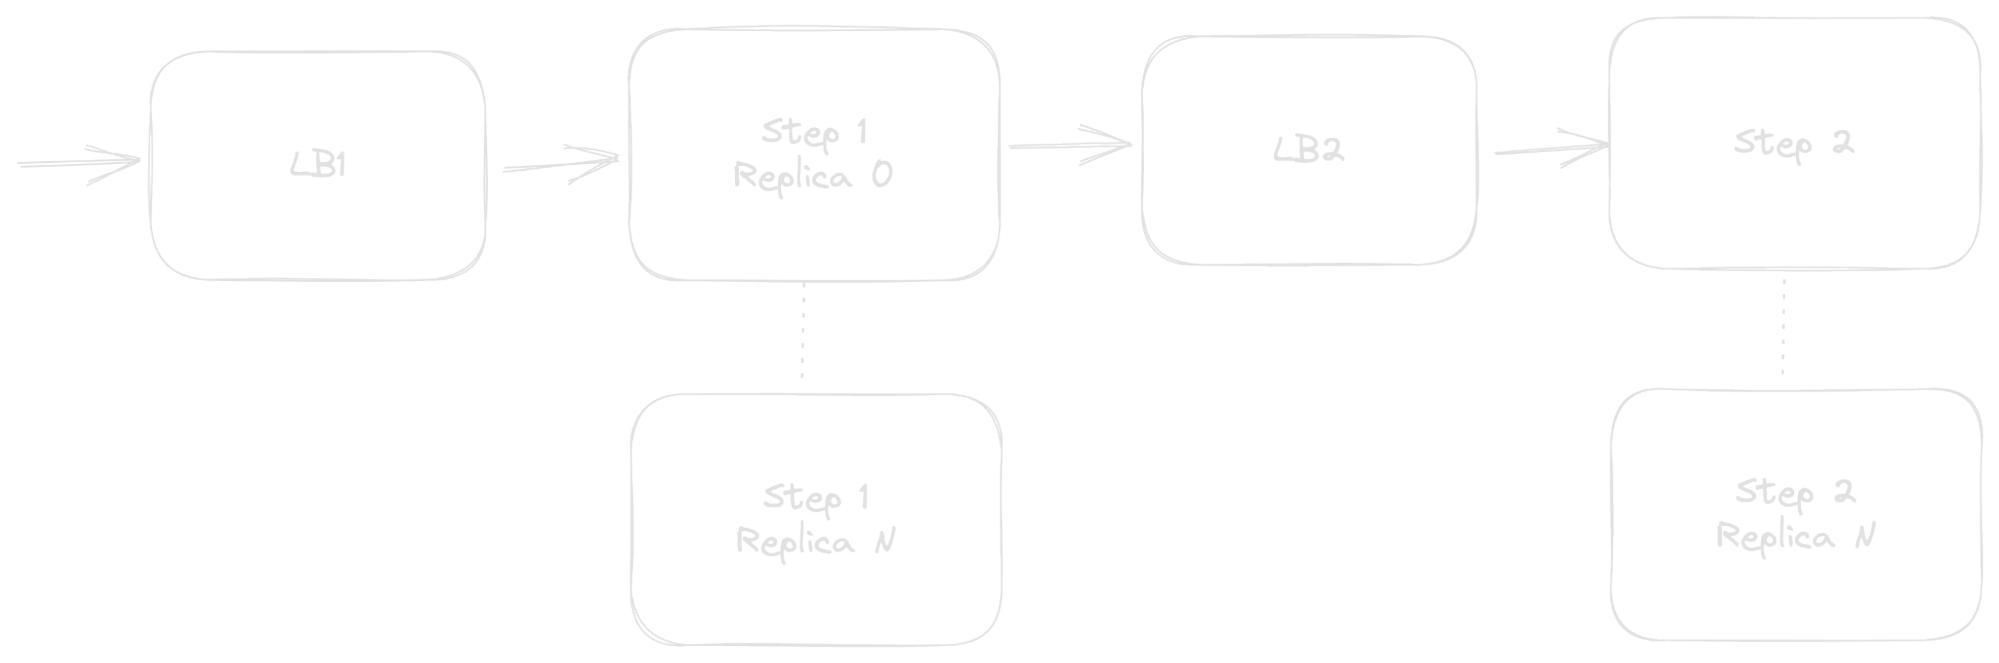 step 1 - 2 with load balancers